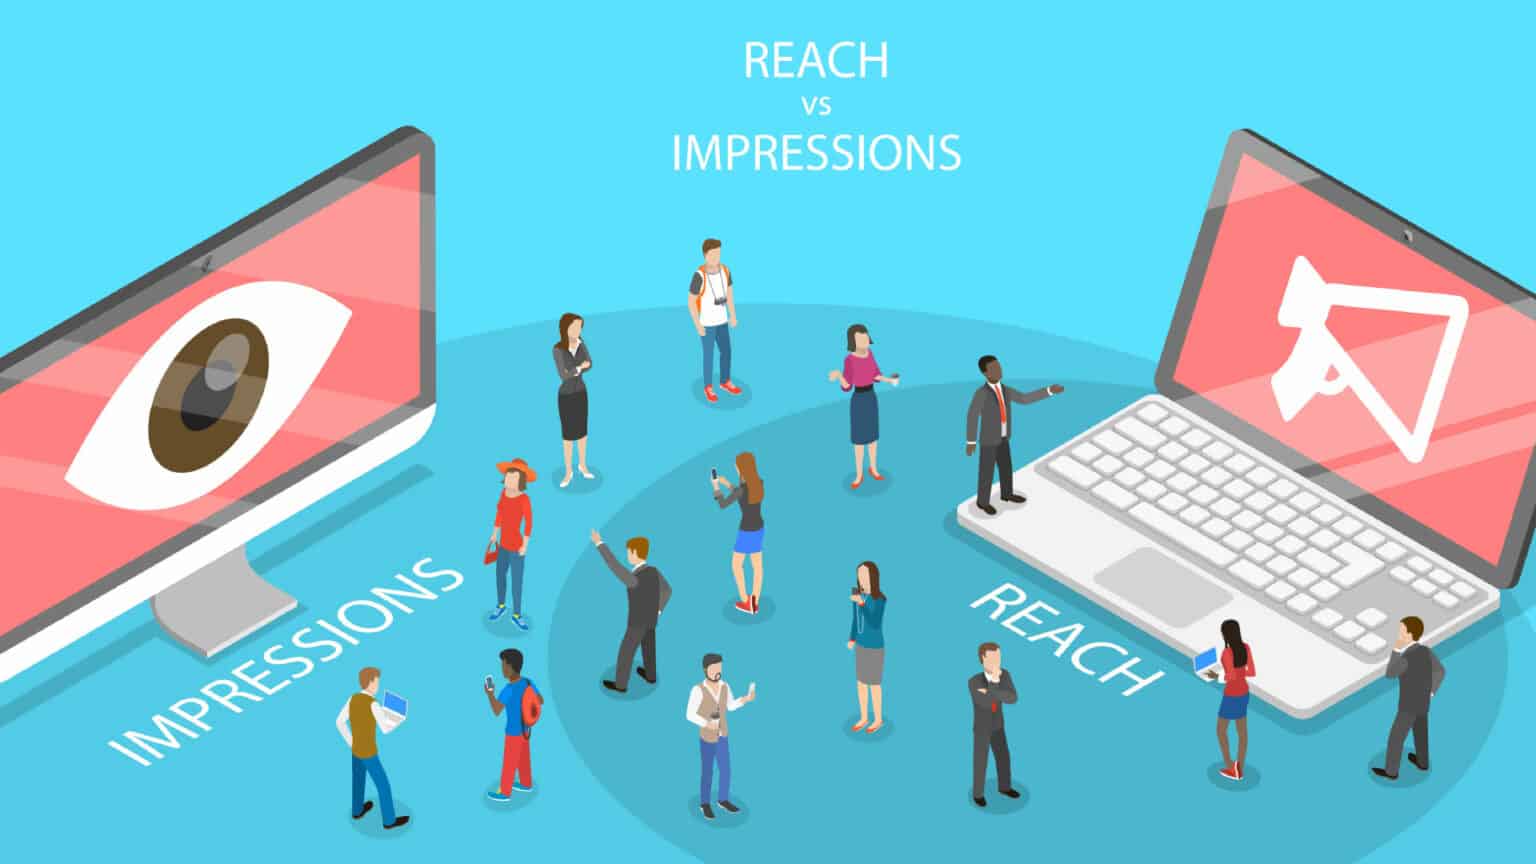 vector illustration showing the difference between reach and impressions in digital advertising